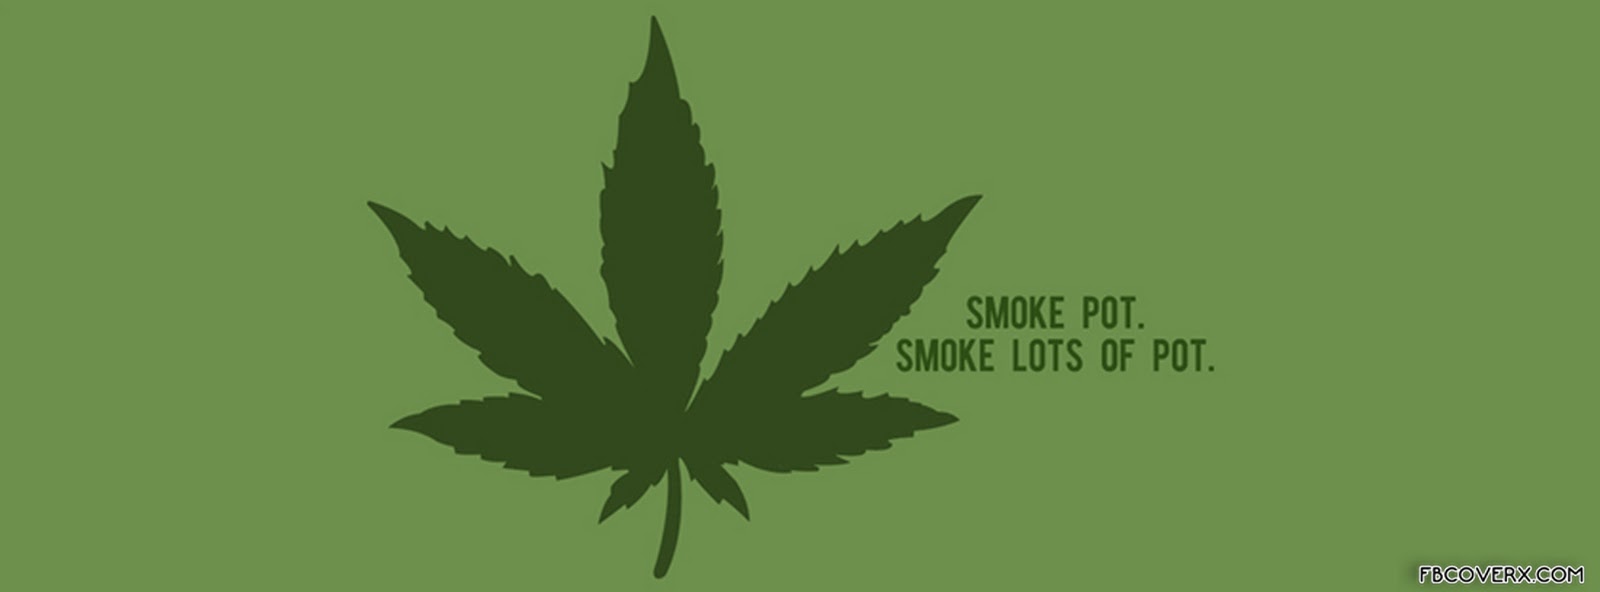 Weed Facebook Covers Quotes. QuotesGram